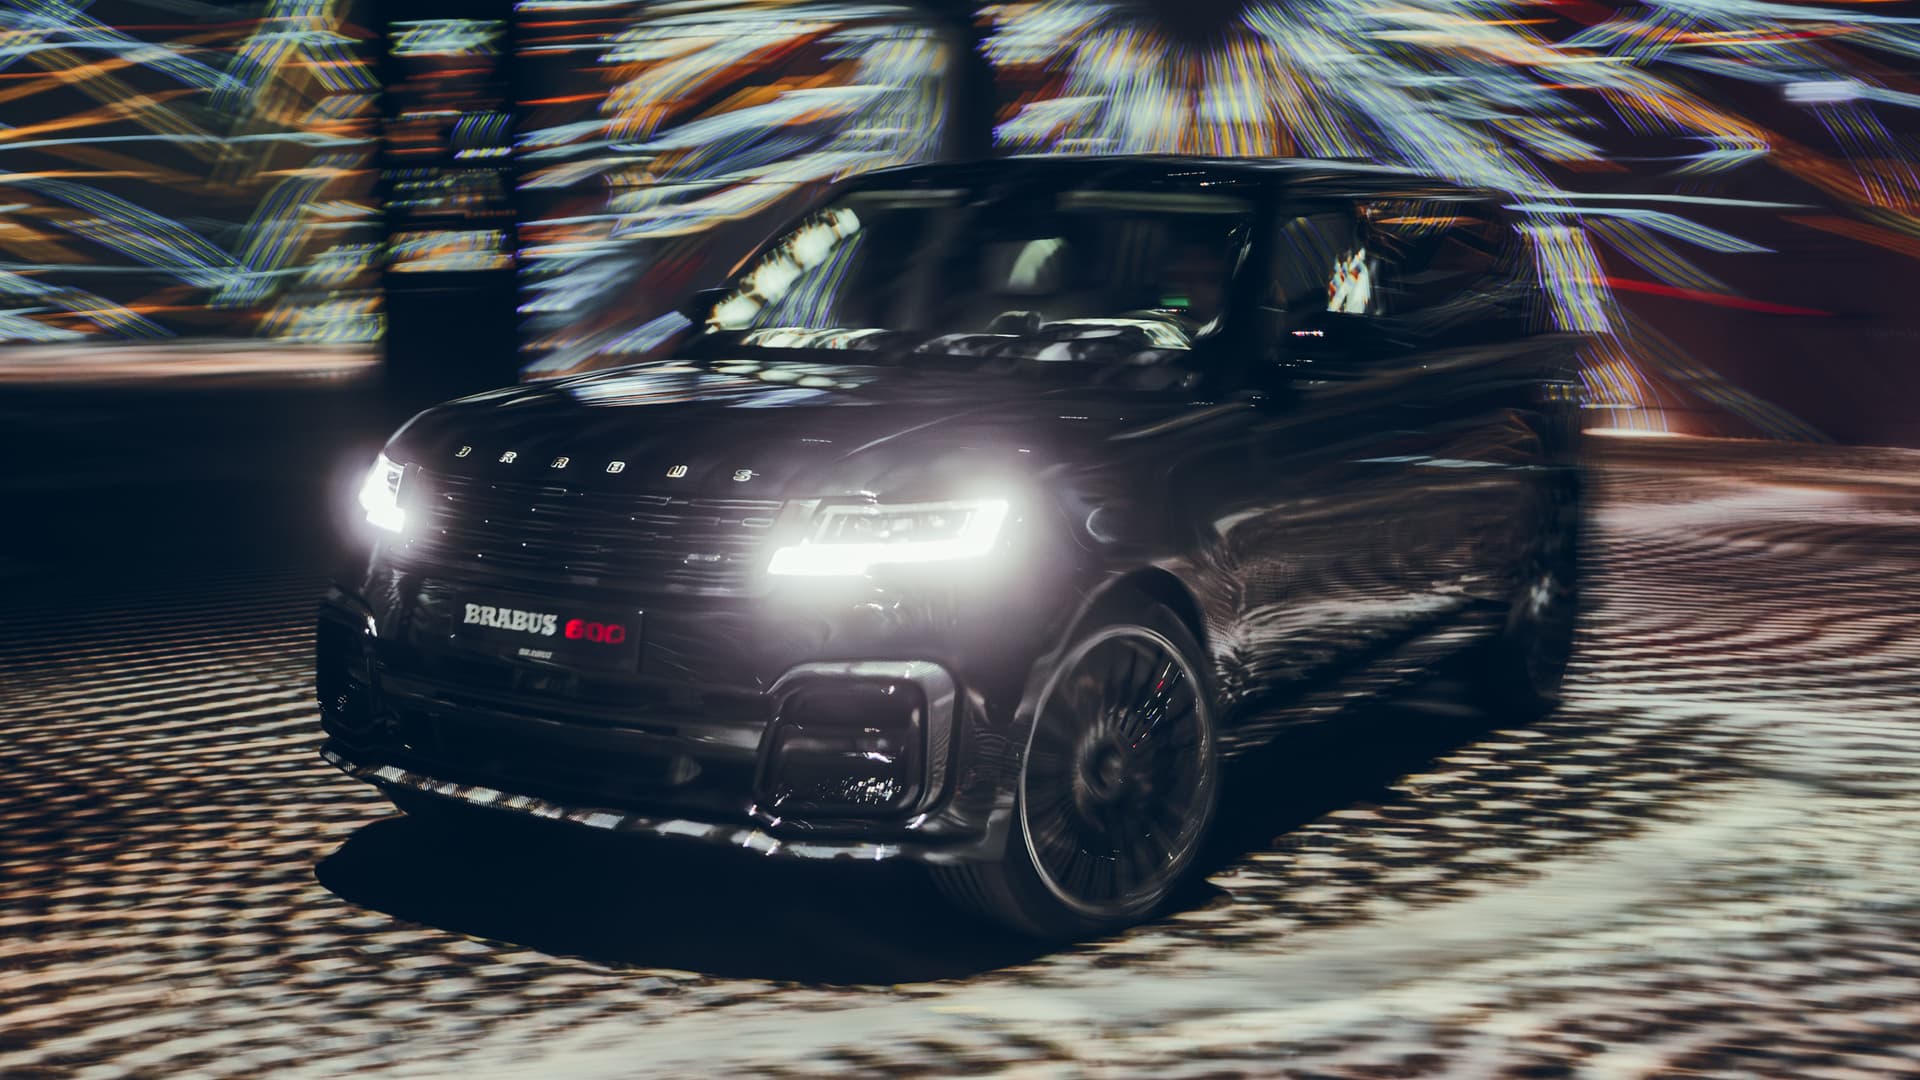 brabus, range rover, land rover, landrover, range rover vogue, wearnes automotive, range rover, land rover, landrover, wearnes automotive, modified, tuned, aftermarket, brabus works its magic on the range rover to create a 600hp 4x4 hot-rod